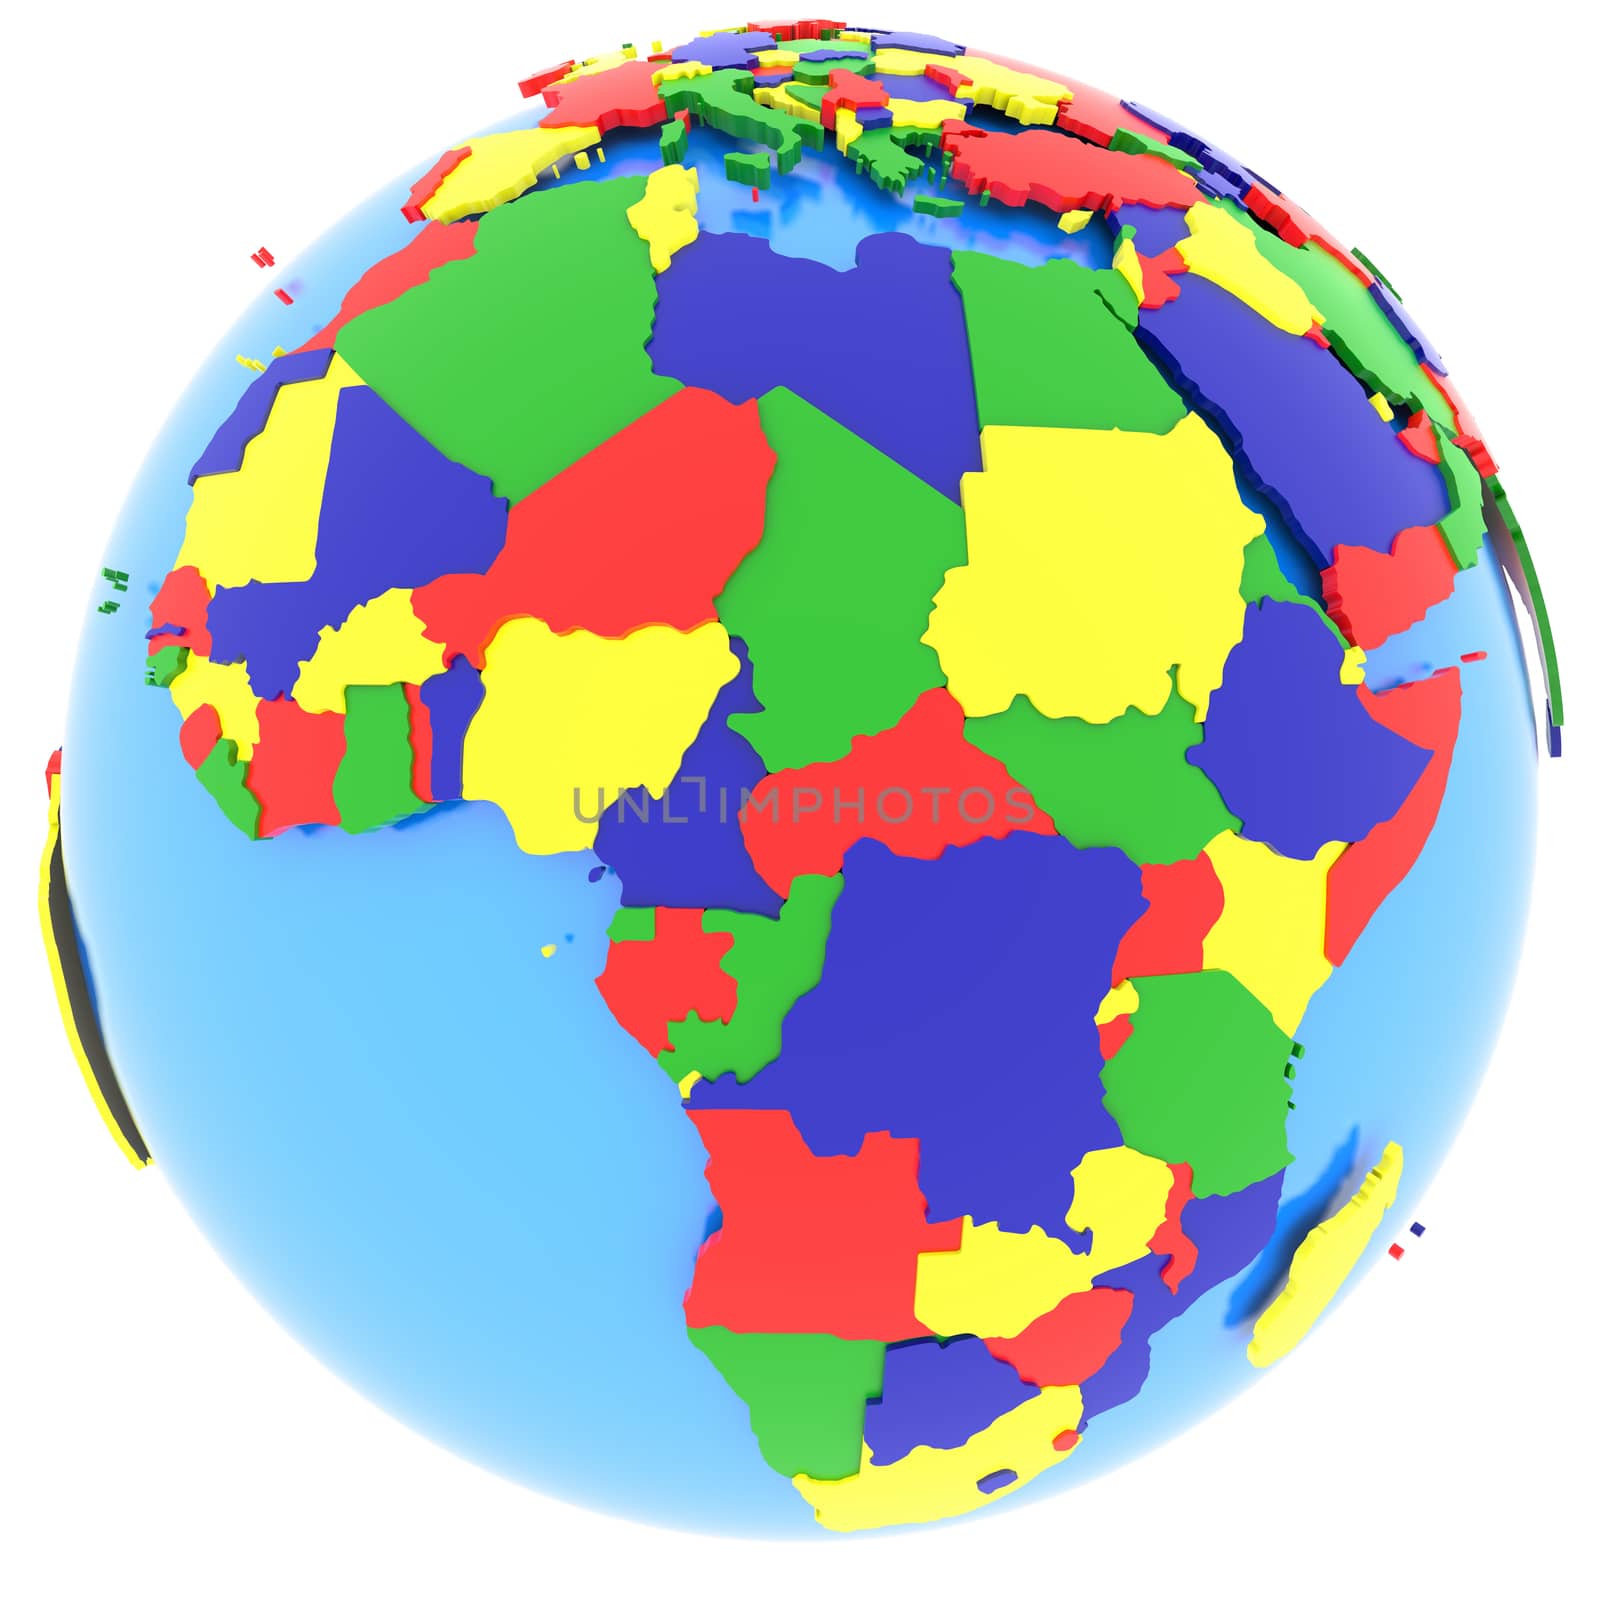 Africa on the globe by Harvepino